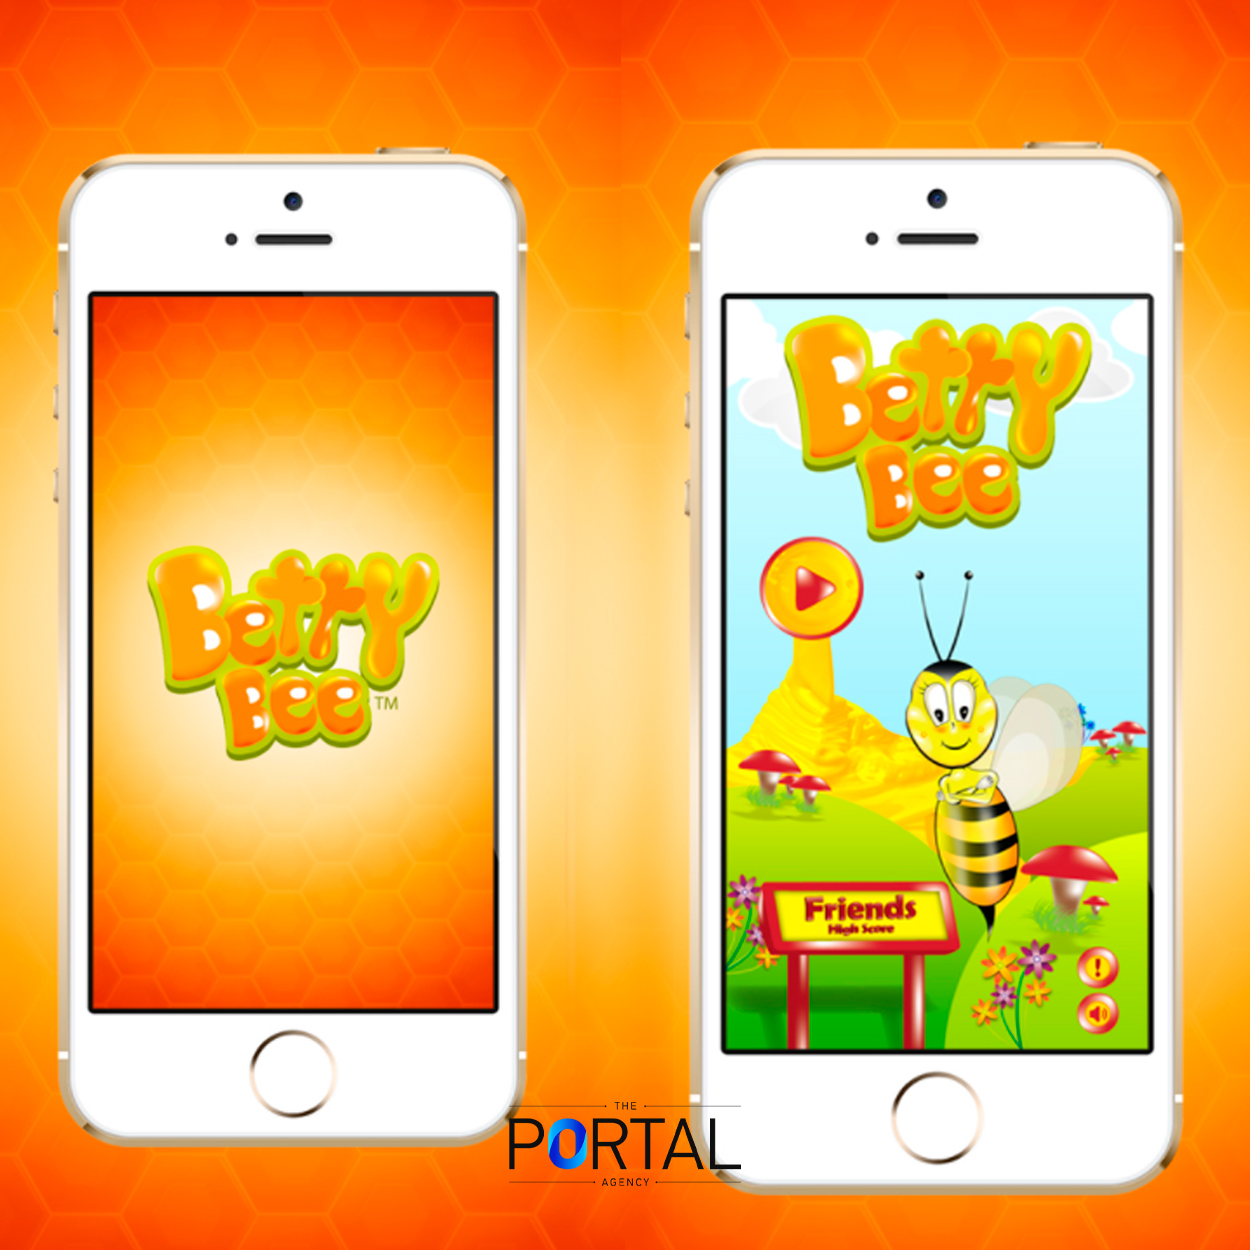 https://theportalagency.com/project/betty-bee-mobile-app/